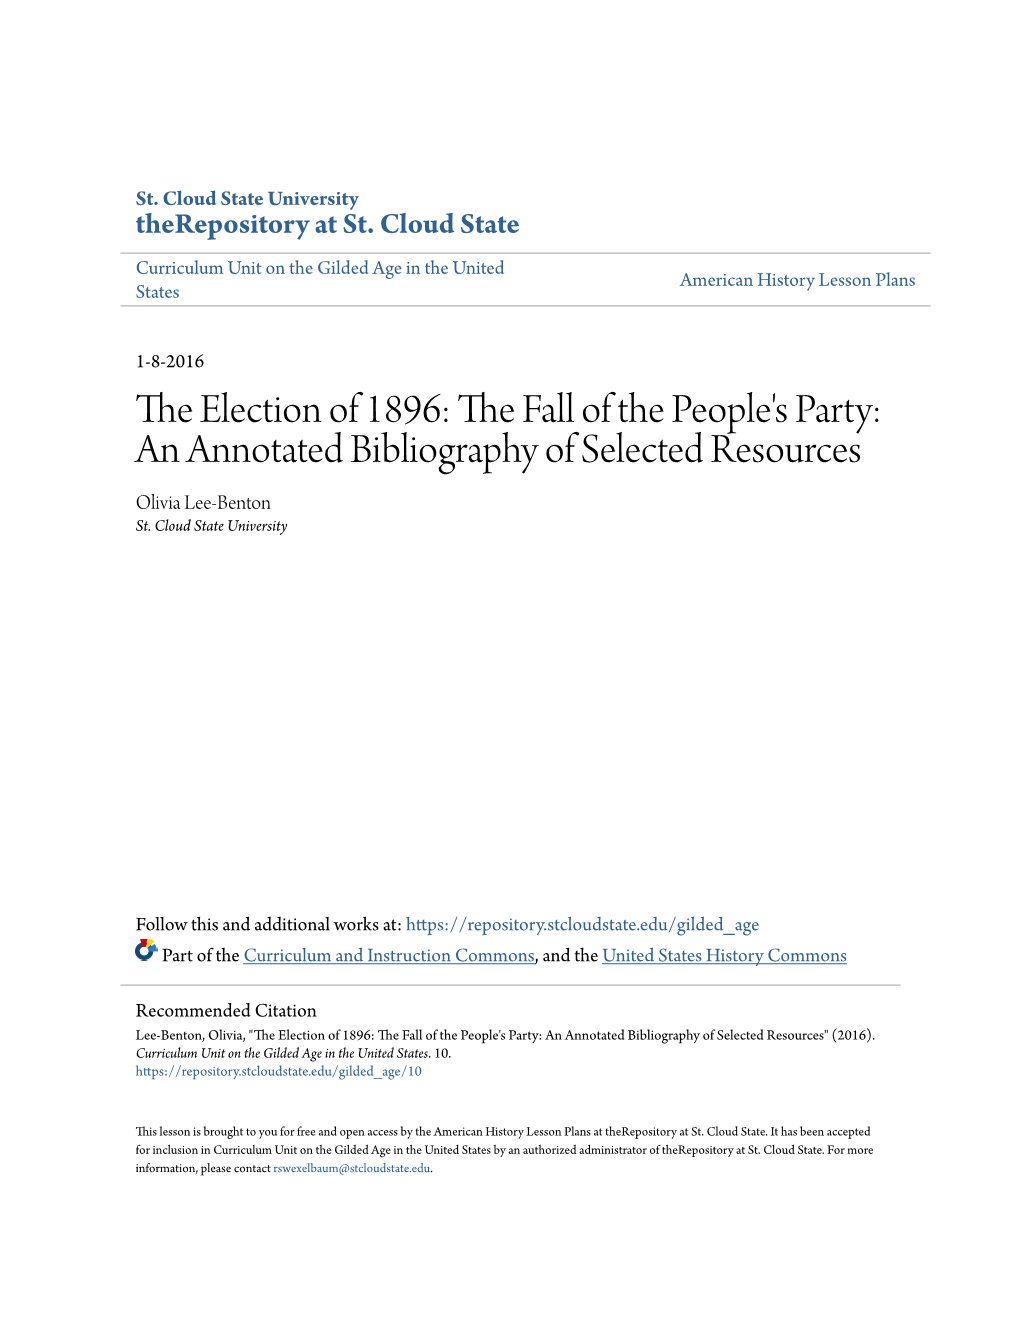 The Election of 1896: the Alf L of the People's Party: an Annotated Bibliography of Selected Resources" (2016)